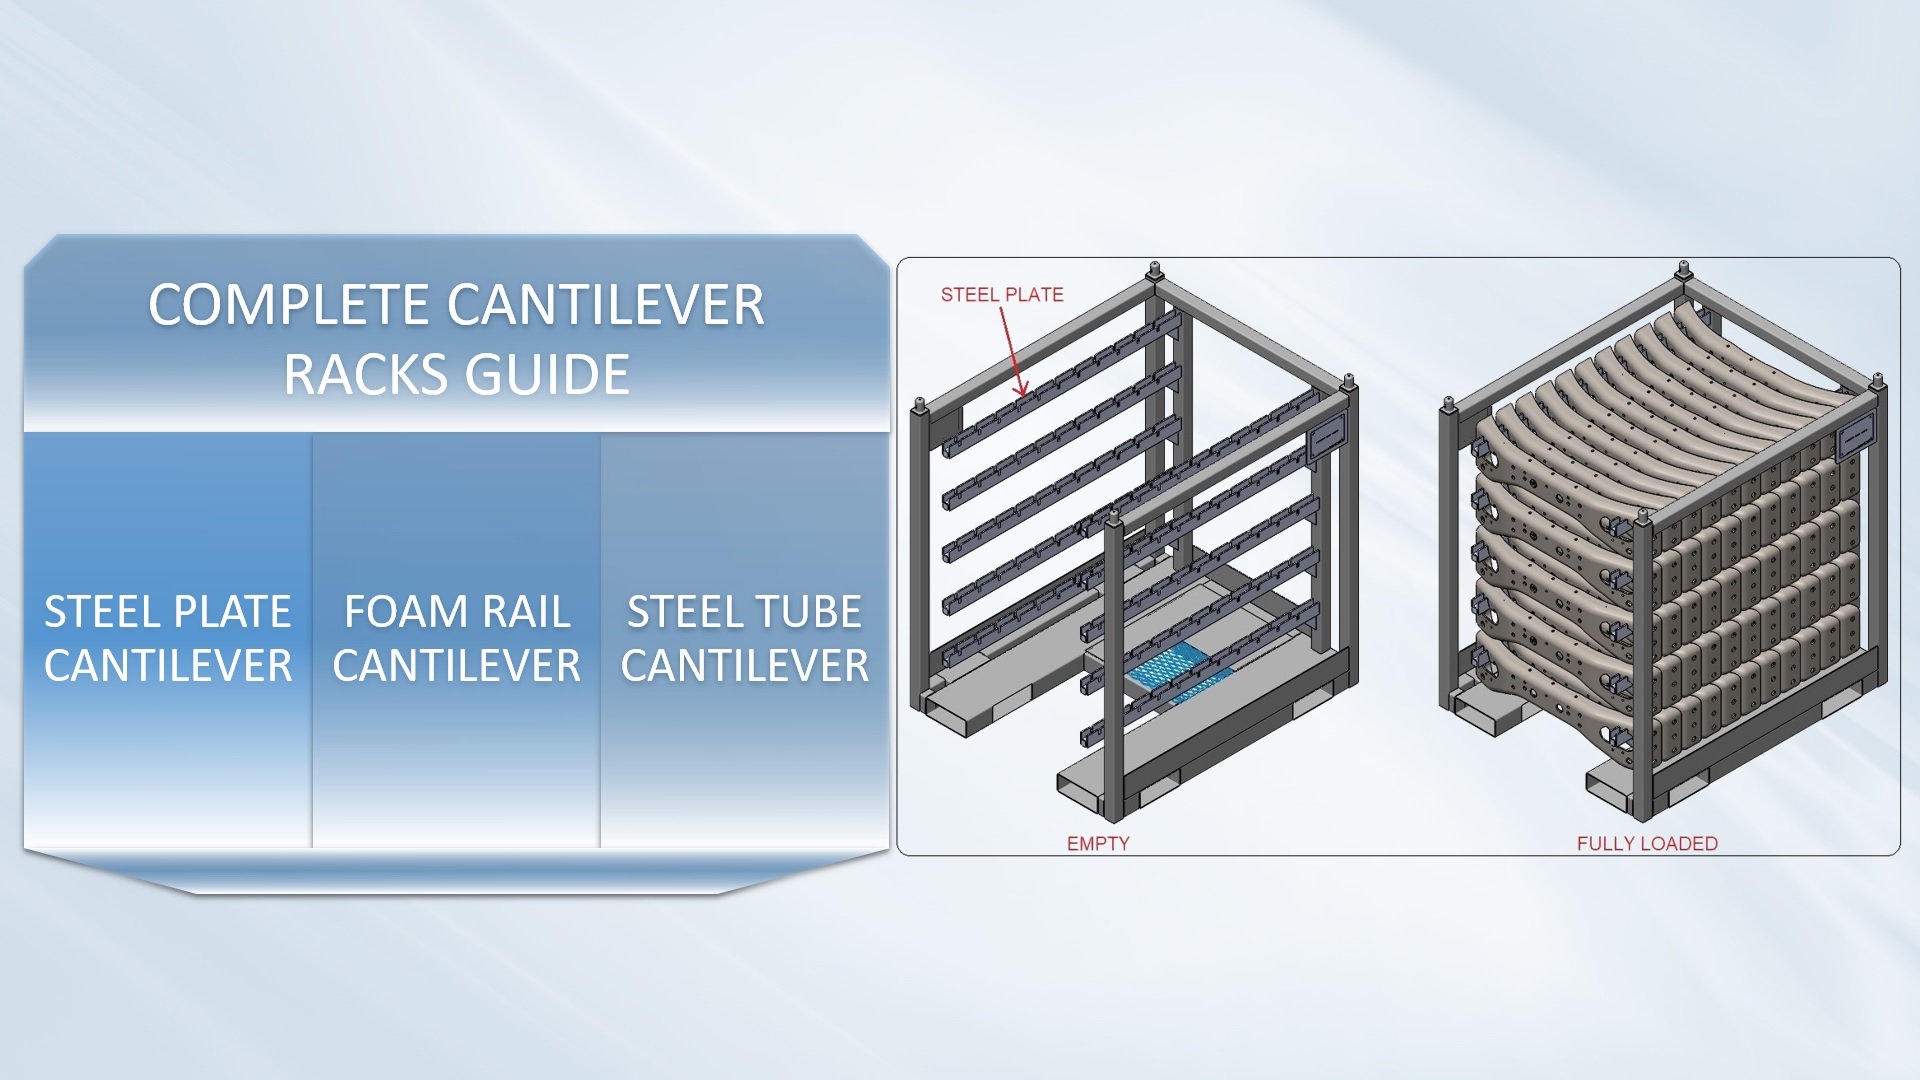 Complete Cantilever Racks Guide